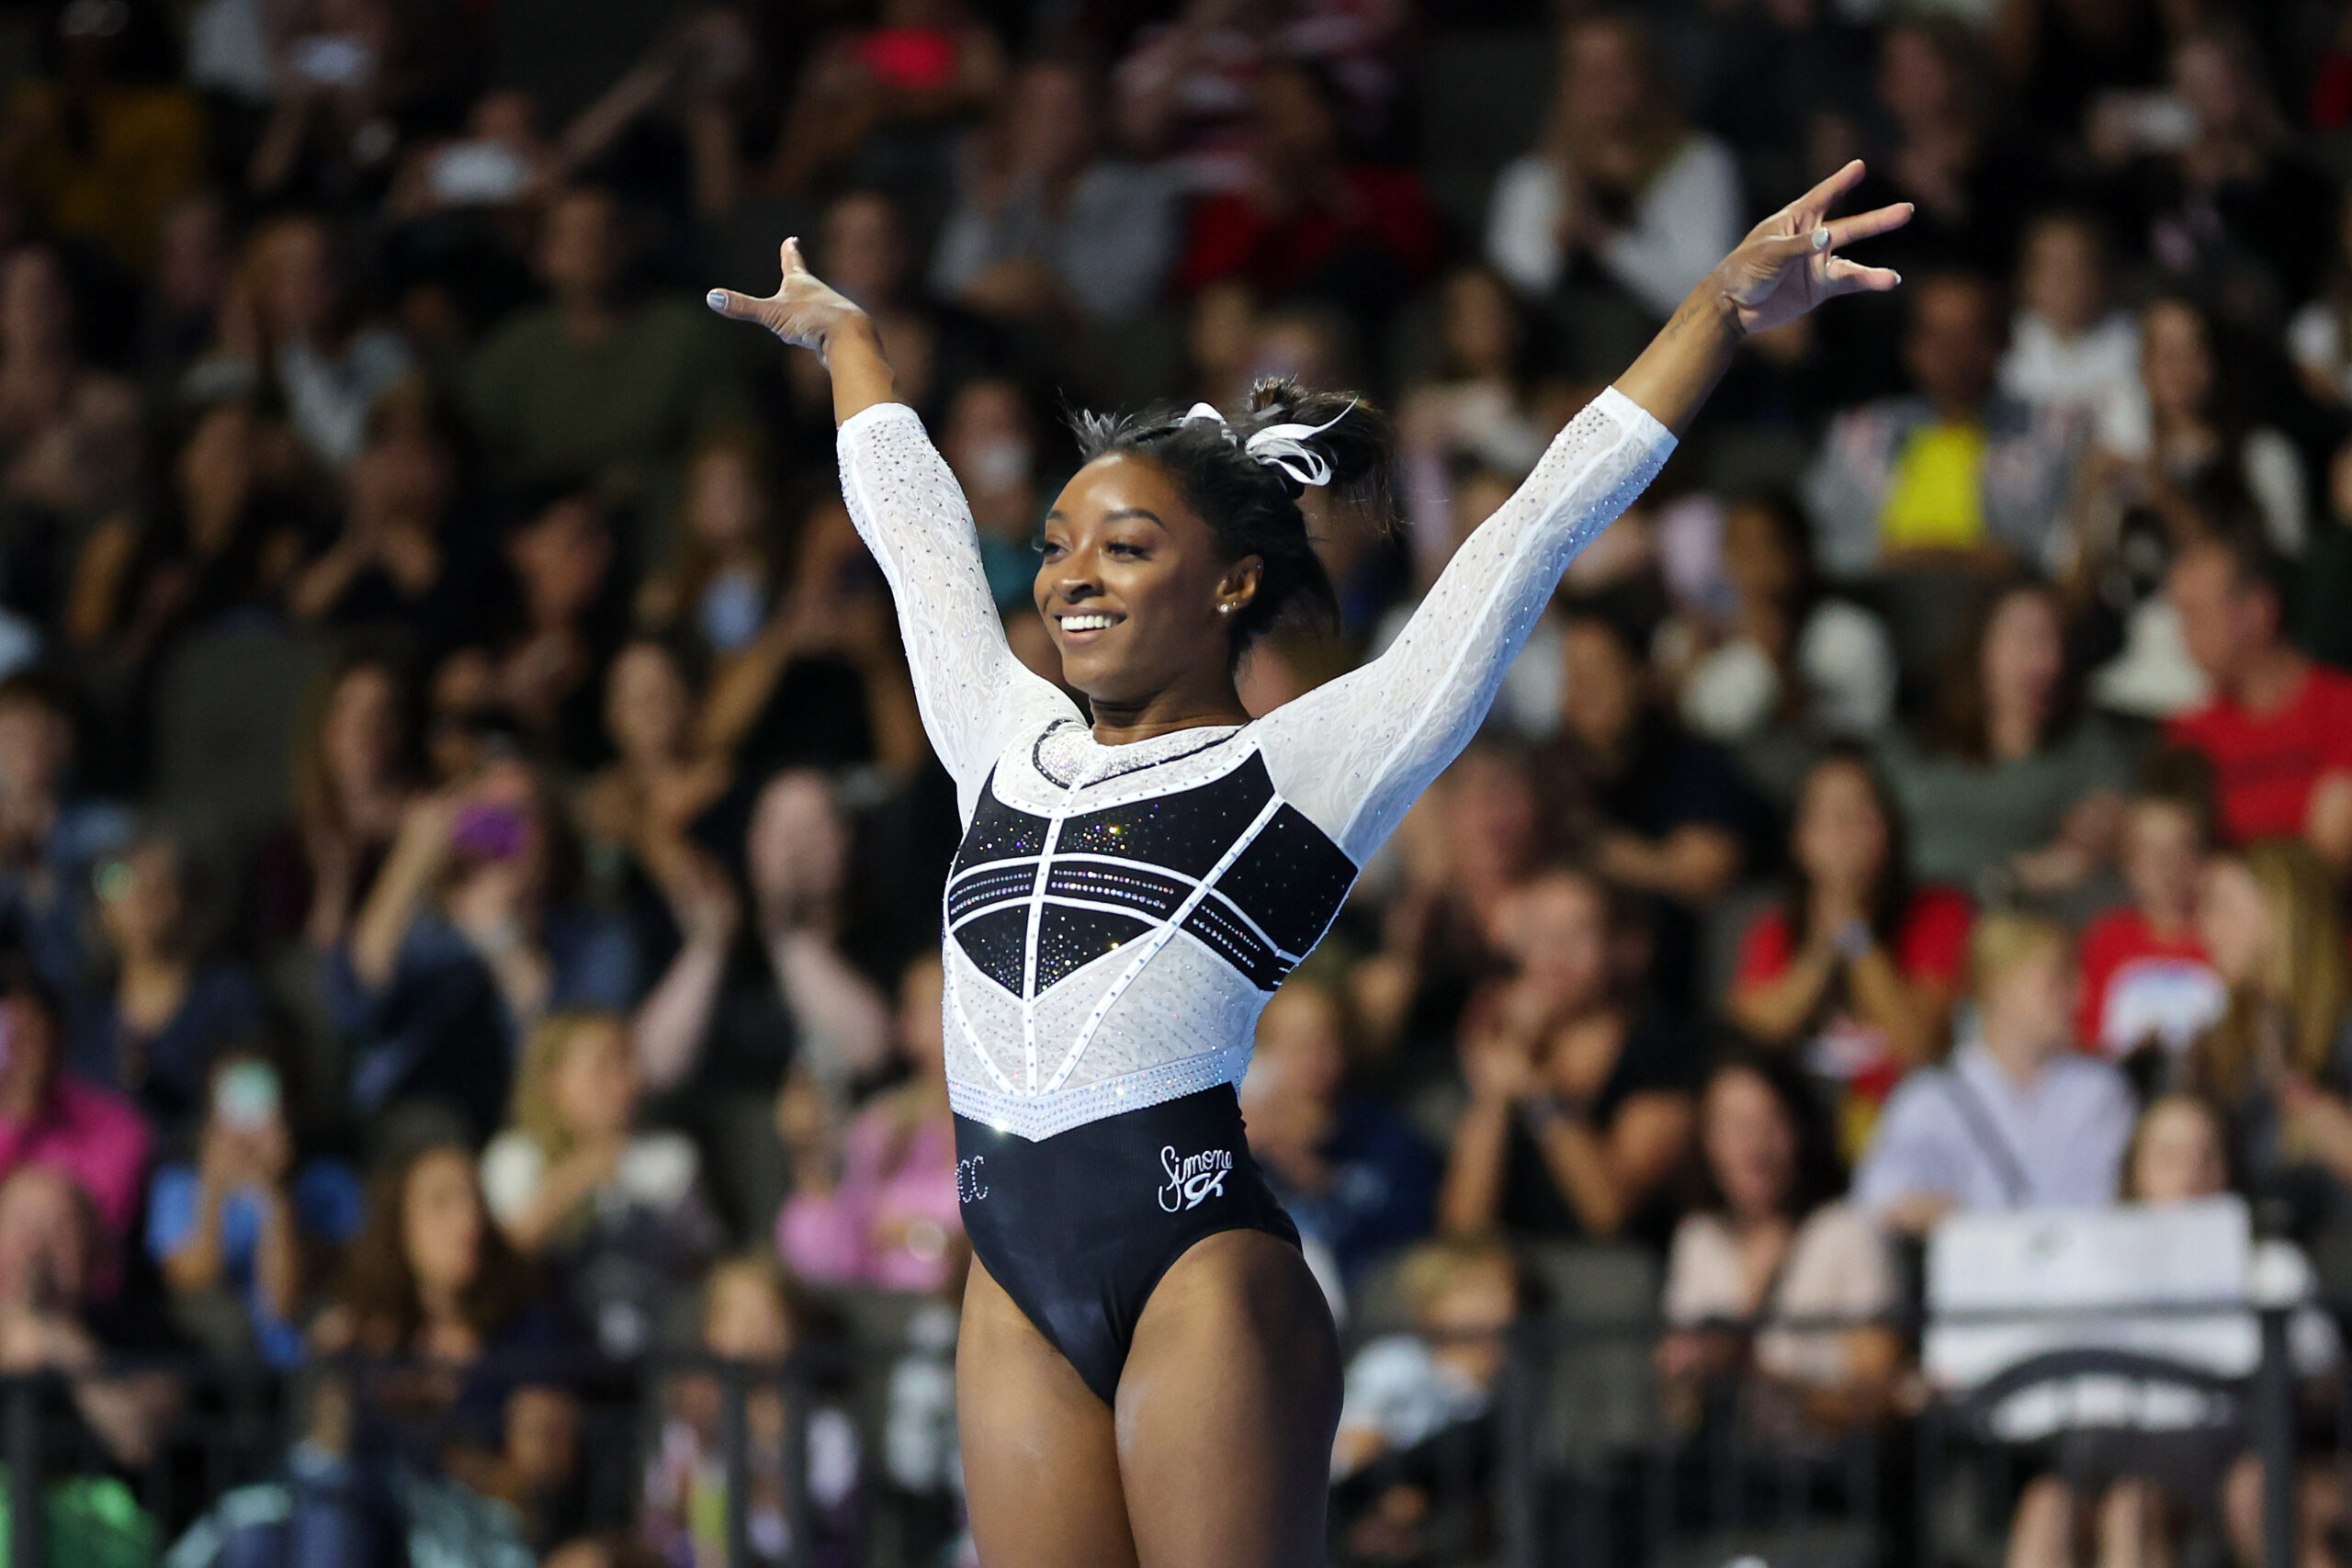 A photo of a female gymnast Simone Biles in mid-performance, extending her arms wide with a joyful expression. She's wearing a leotard with white and dark designs resembling a starry night. The background is filled with a blurred audience in a gymnastics arena.